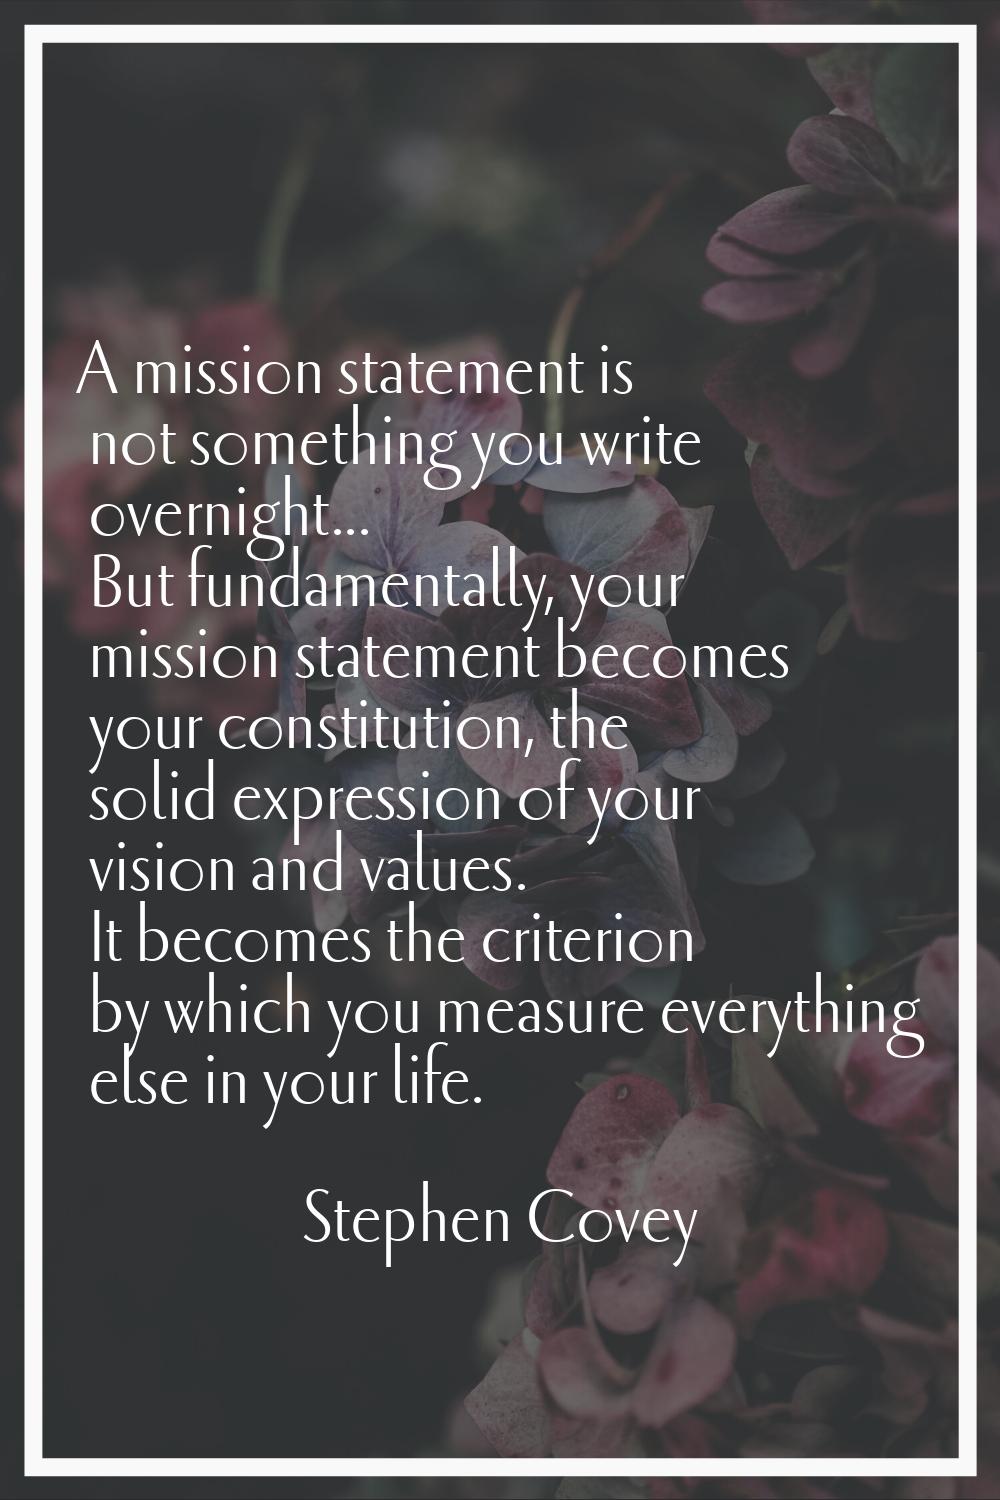 A mission statement is not something you write overnight... But fundamentally, your mission stateme